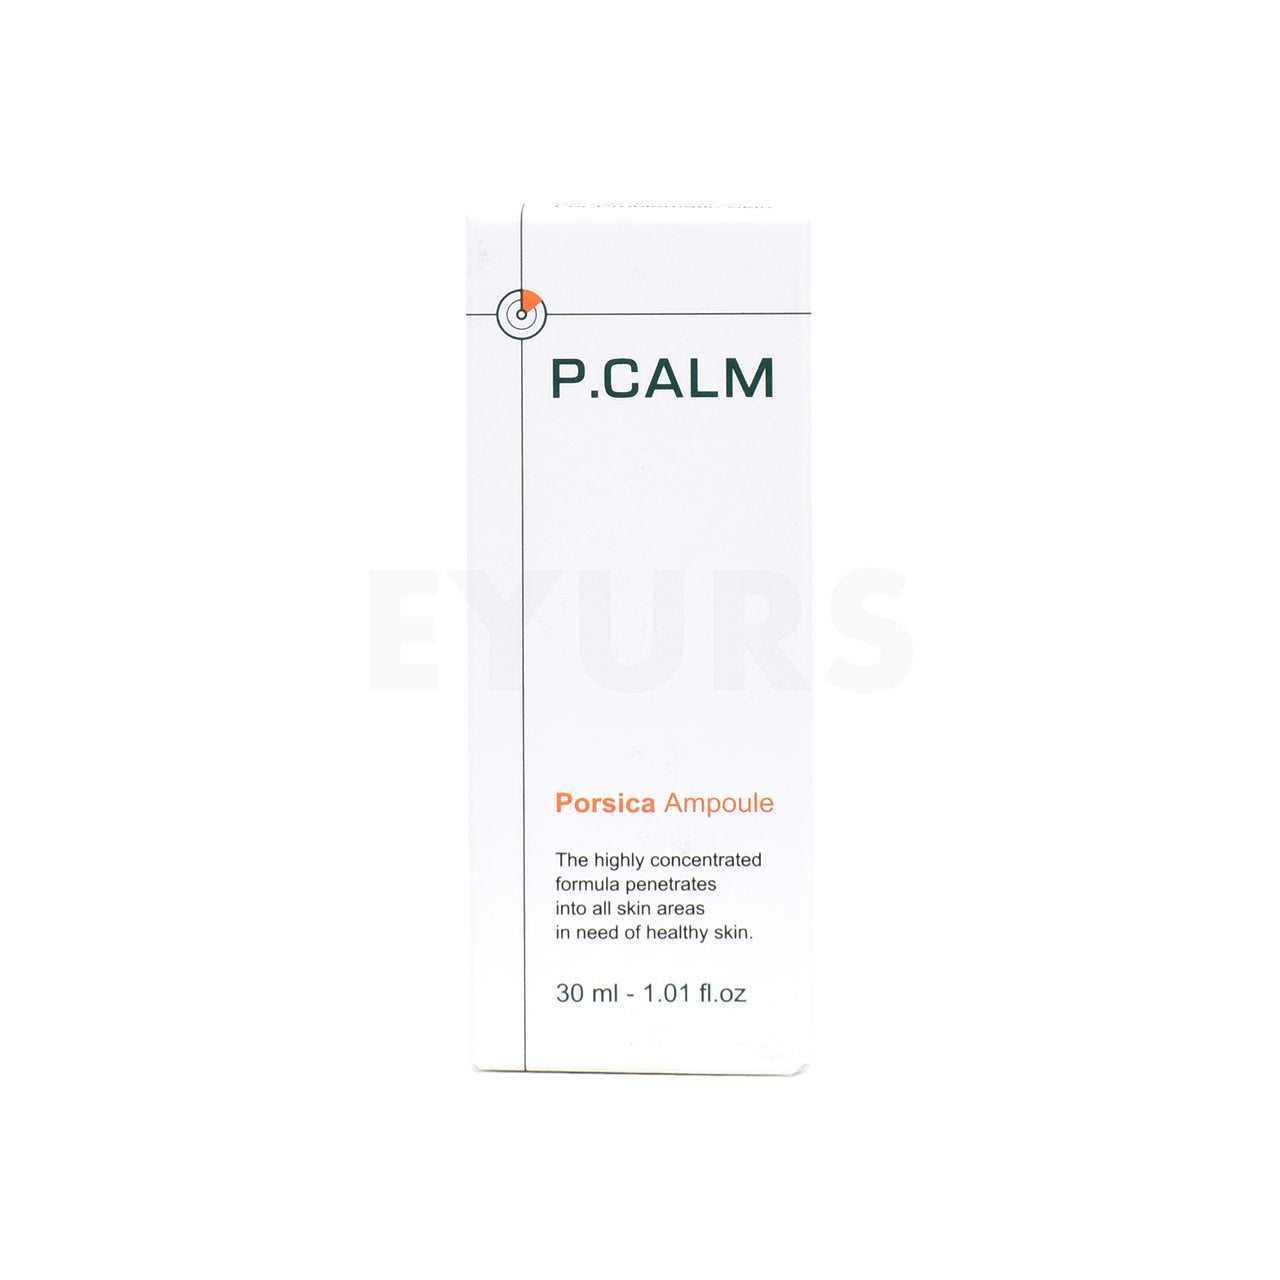 pcalm porsica ampoule front side packaging box